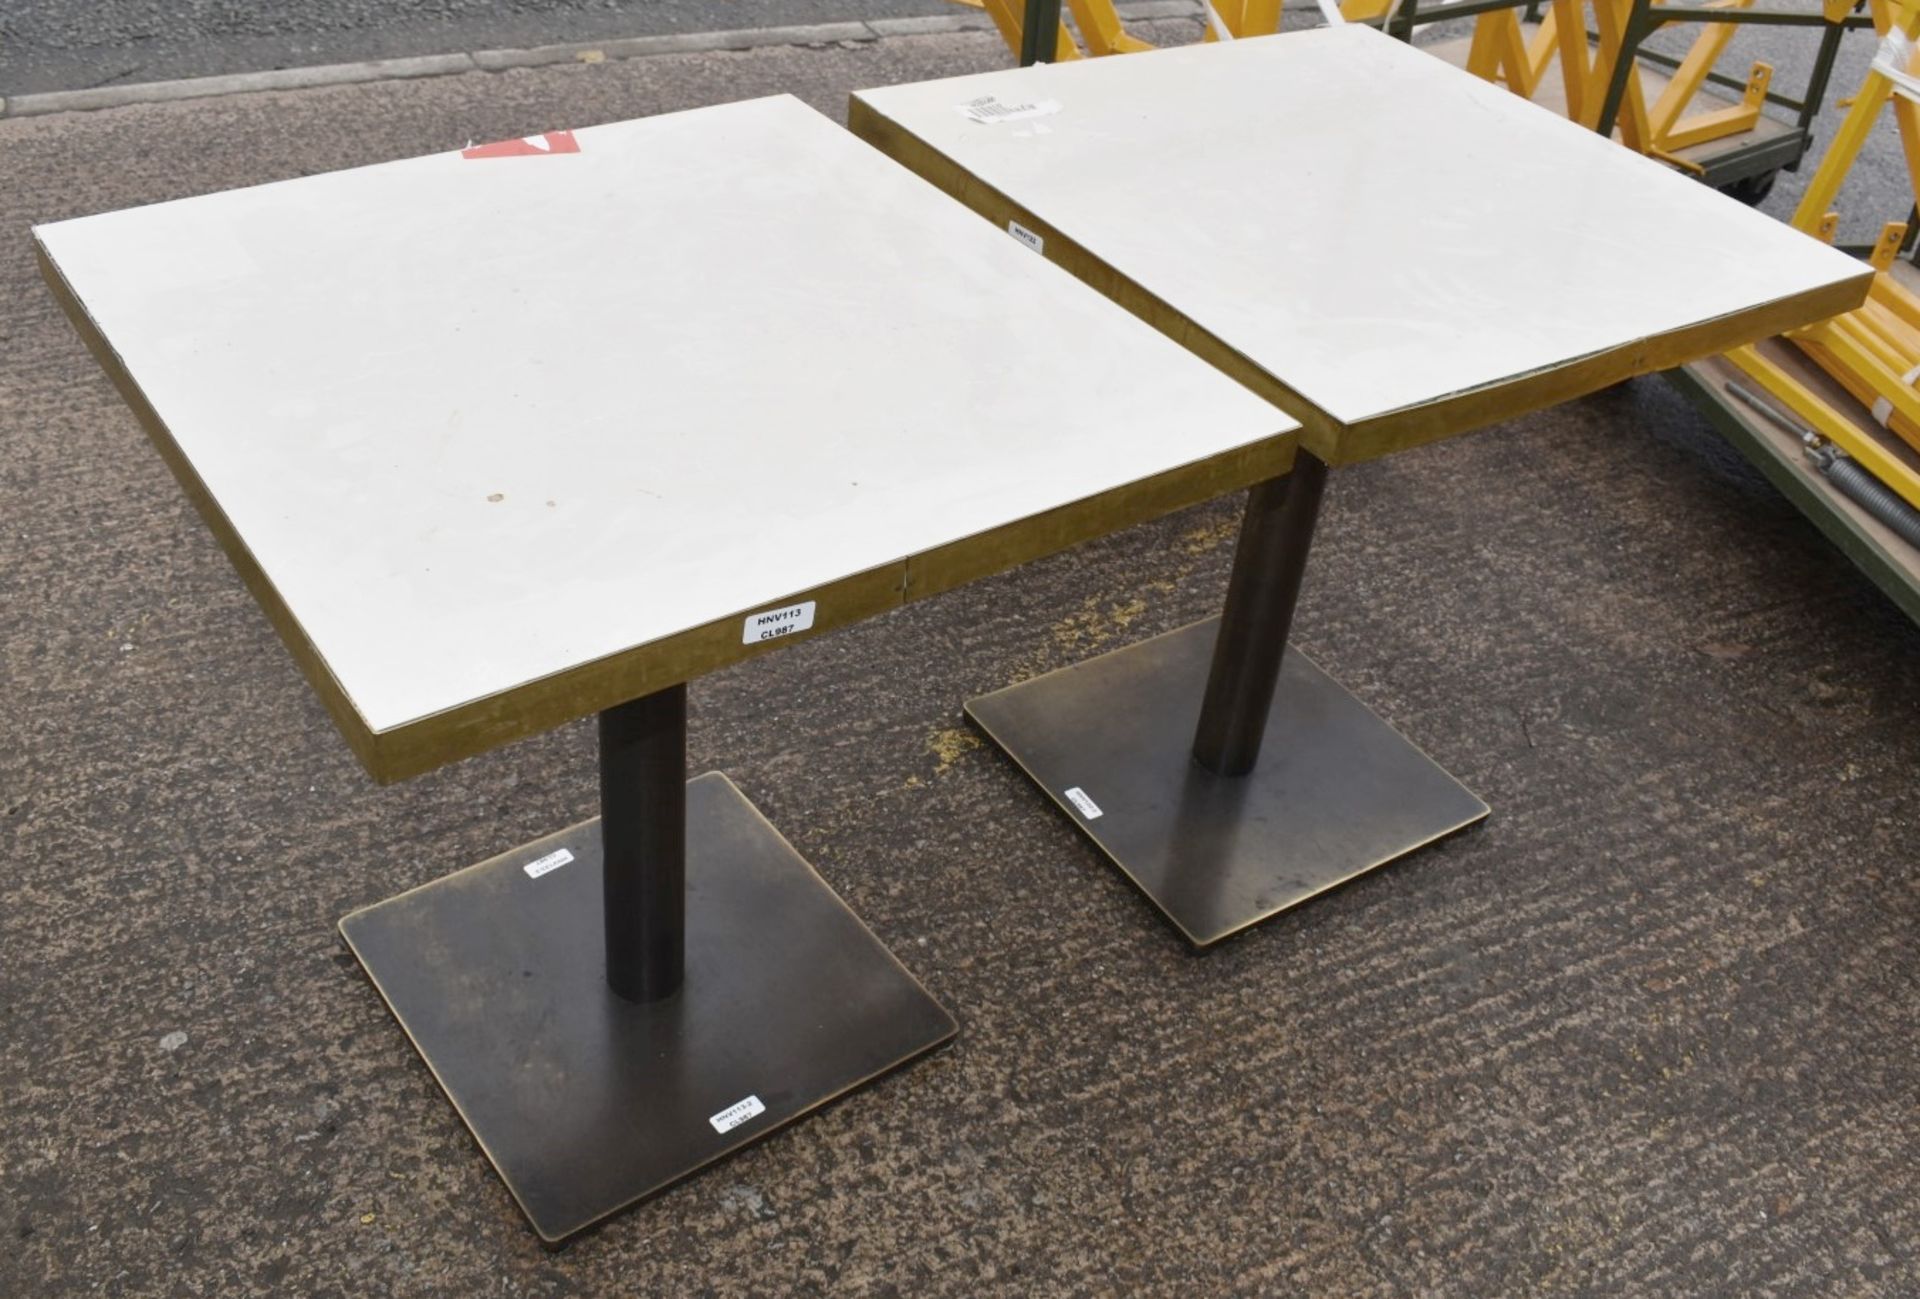 5 x Wooden Topped Bistro Tables Featuring Wooden Top With A Marble Aesthetic, Brass Trim And - Image 4 of 7